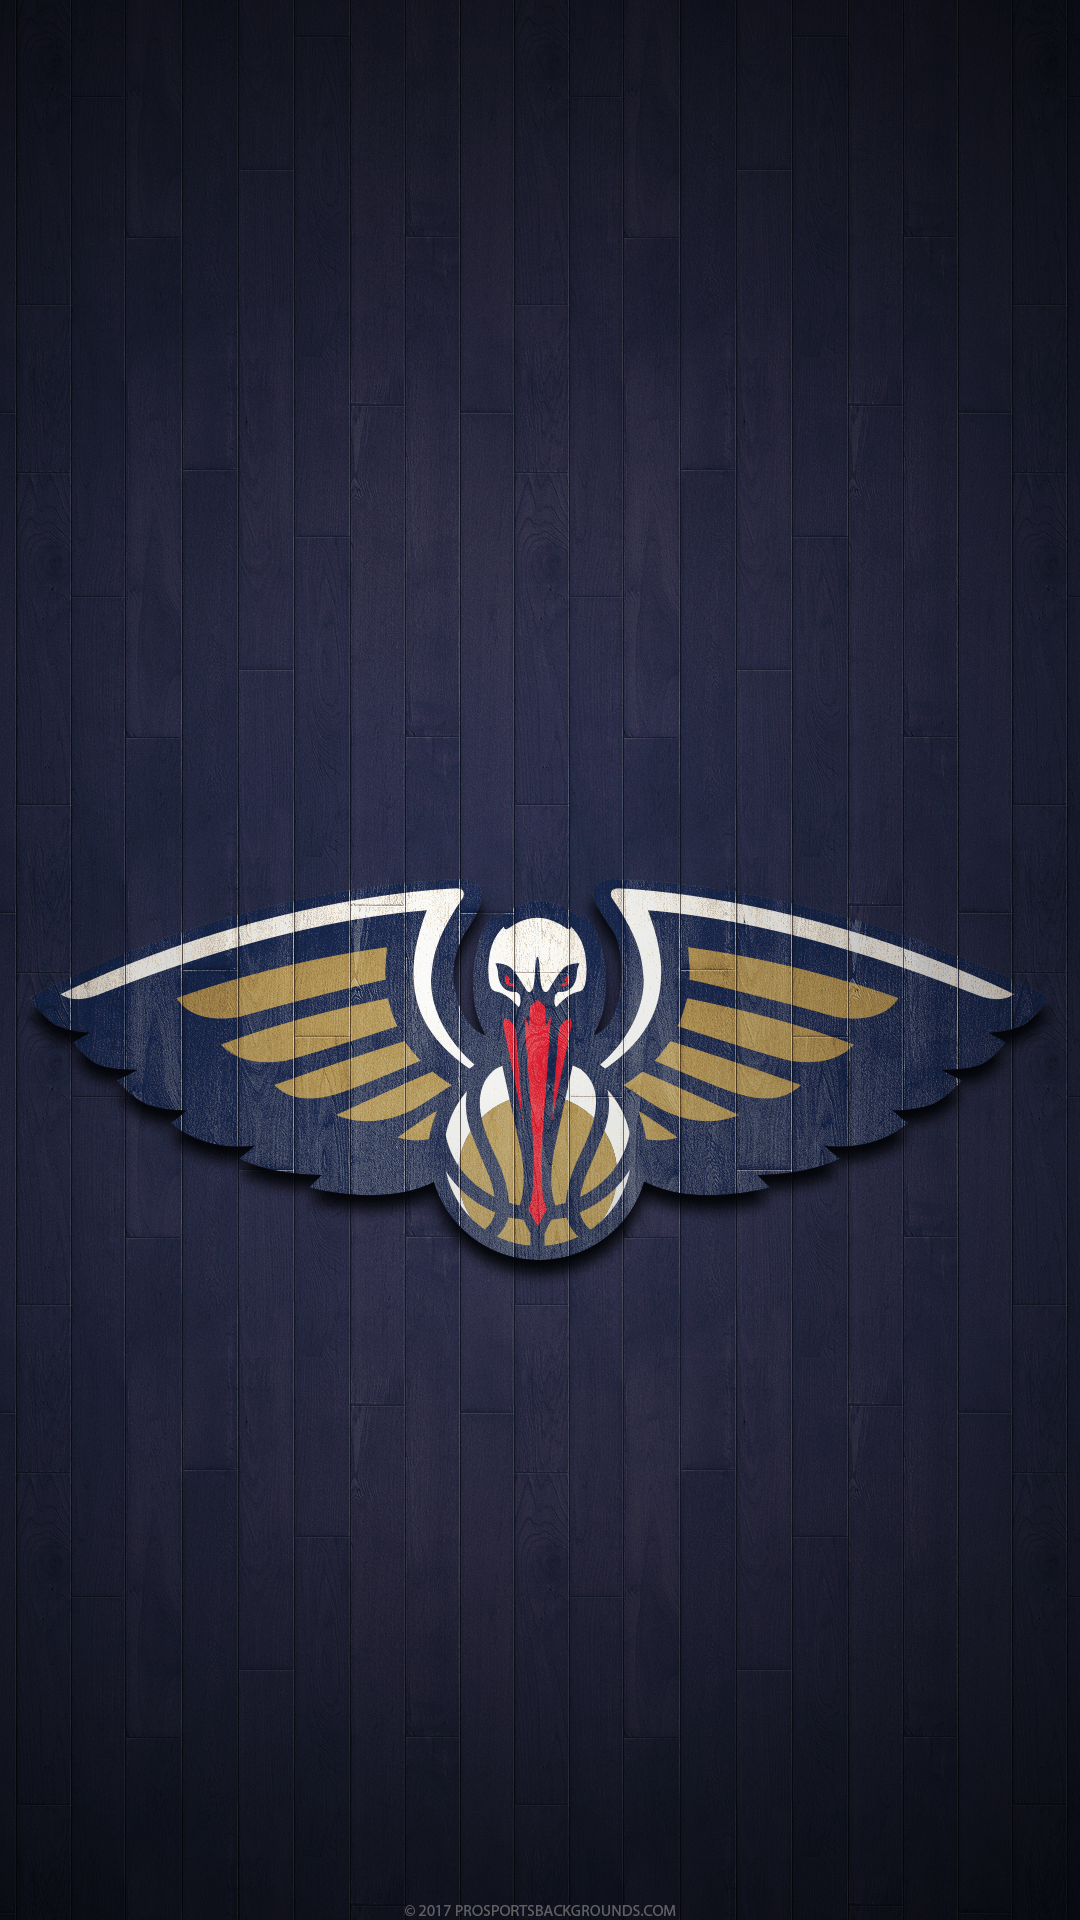 New Orleans Pelicans Wallpaper. iPhone. Android